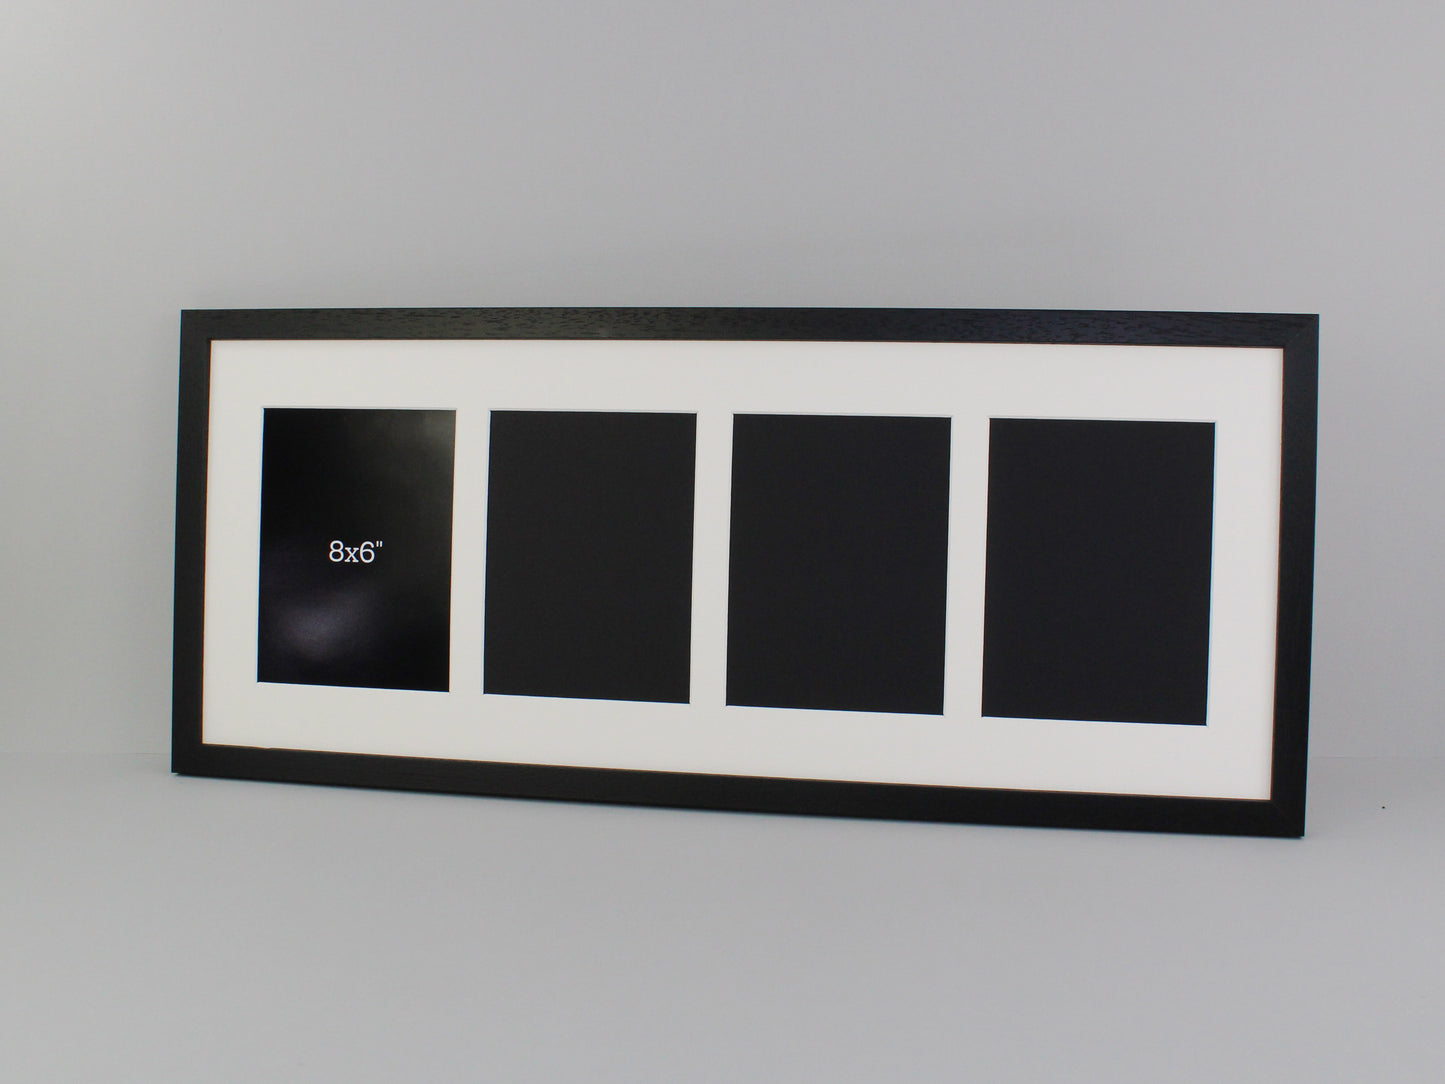 Multi Aperture Photo Frame - Fits Four 8x6 Photos - 30x75cm - Ideal for Displaying Memories and Capturing Moments